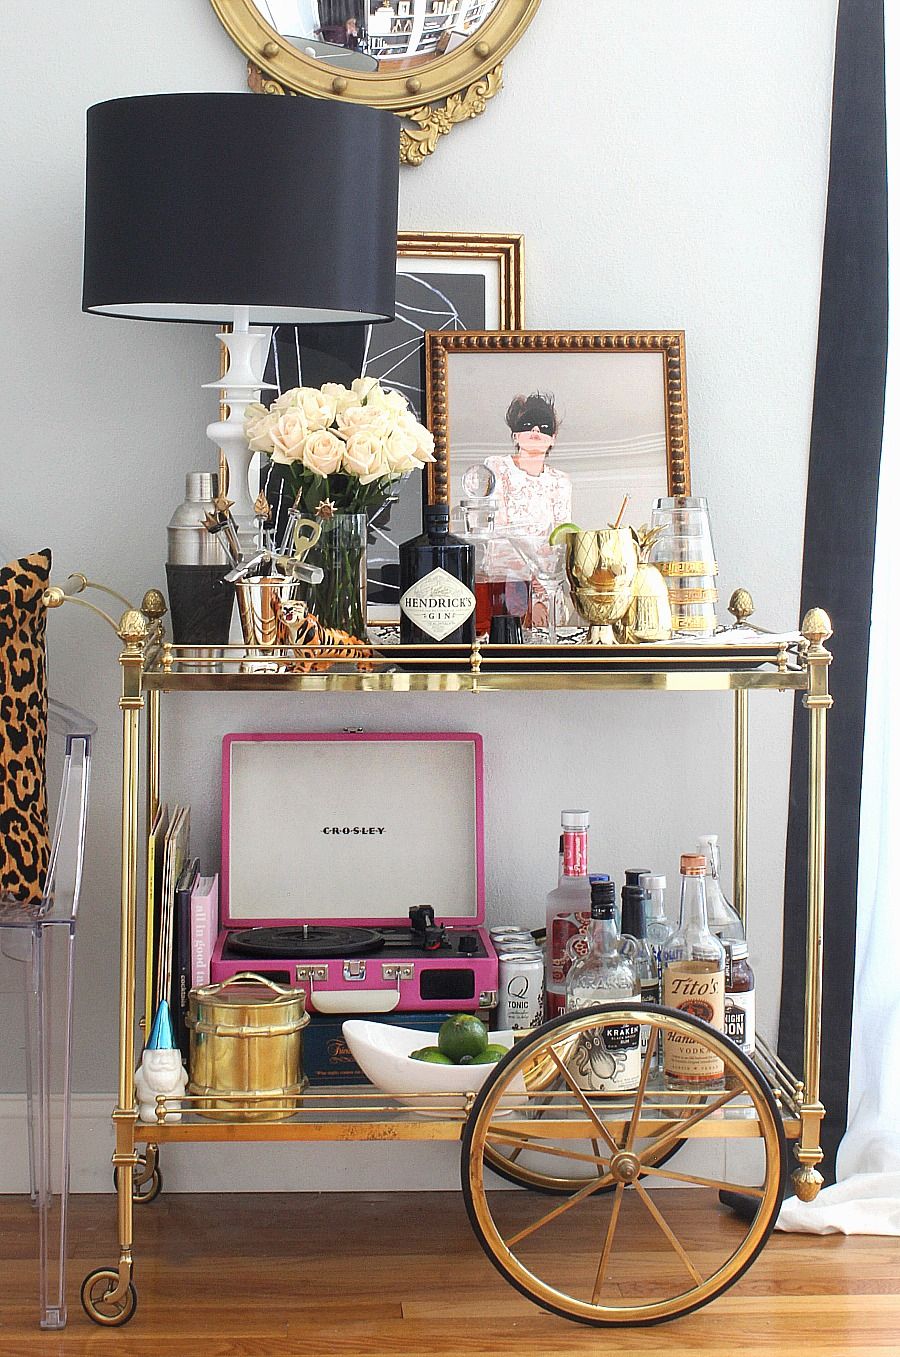 Create Your Bar Cart in a Multifunctional Concept